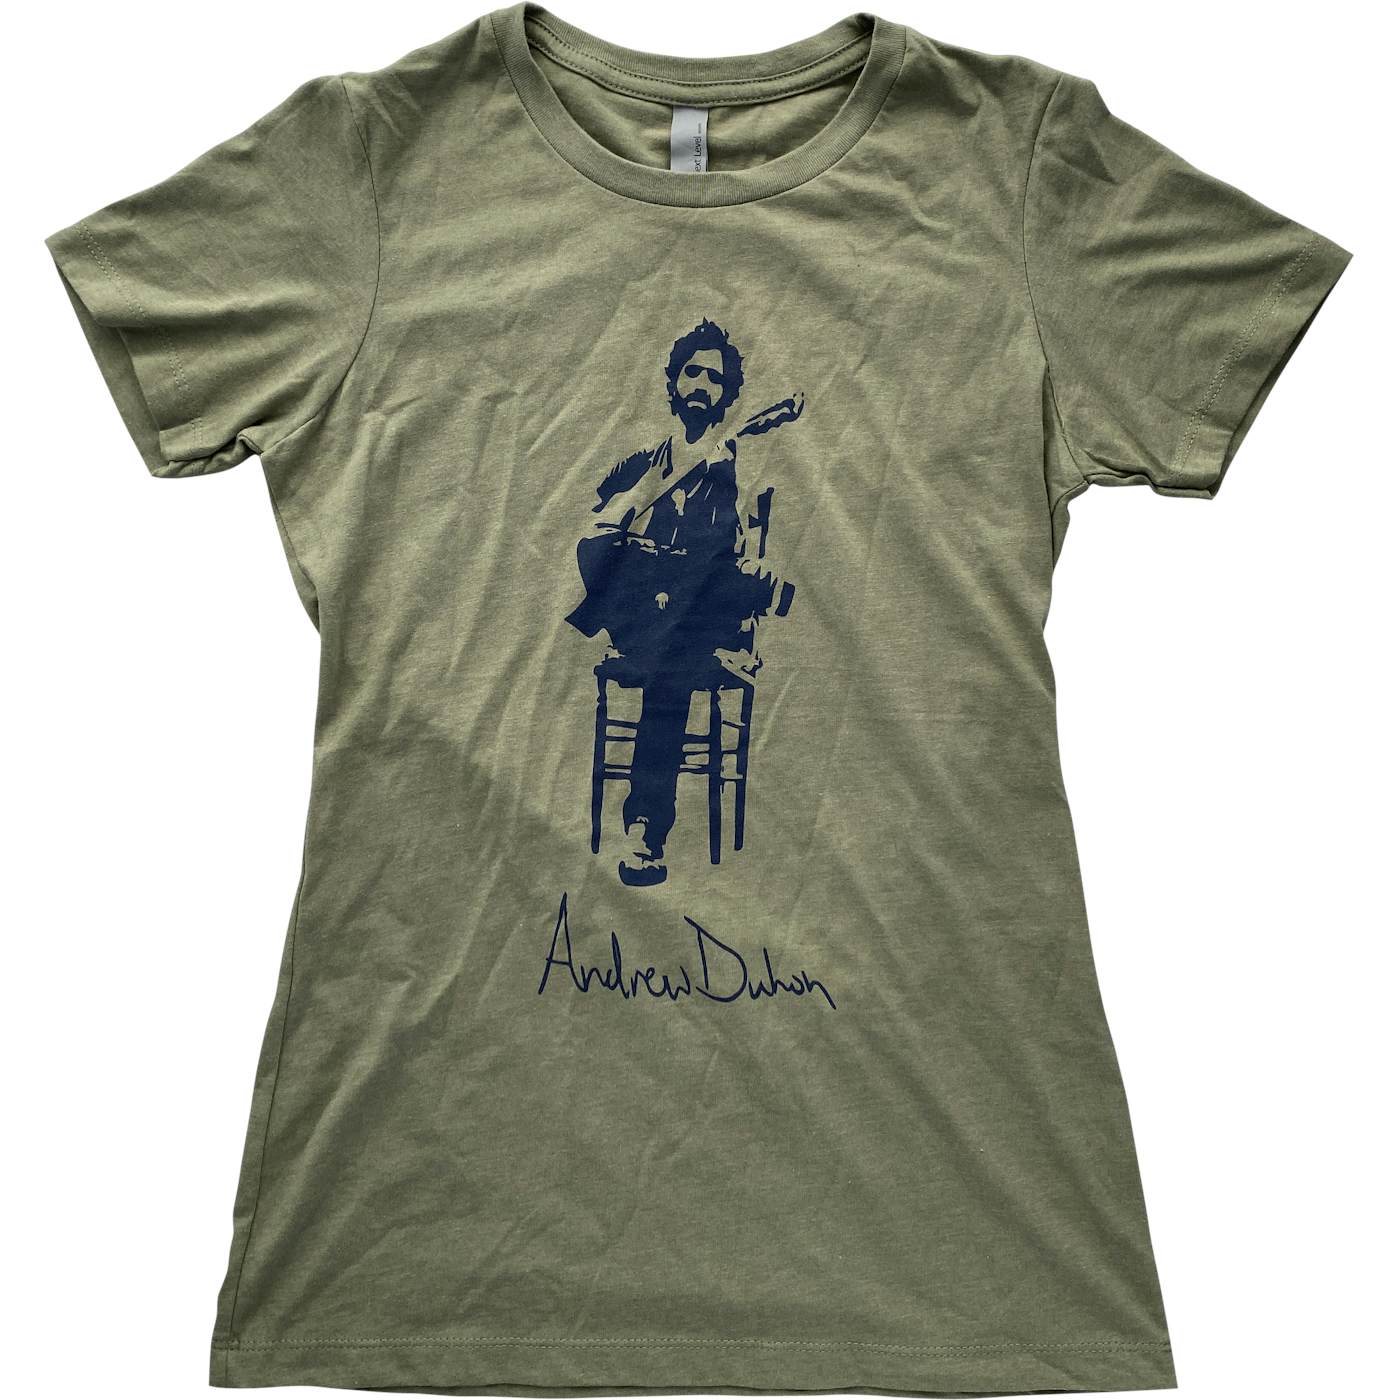 Andrew Duhon Ladies Silhouette Shirt- Olive Green